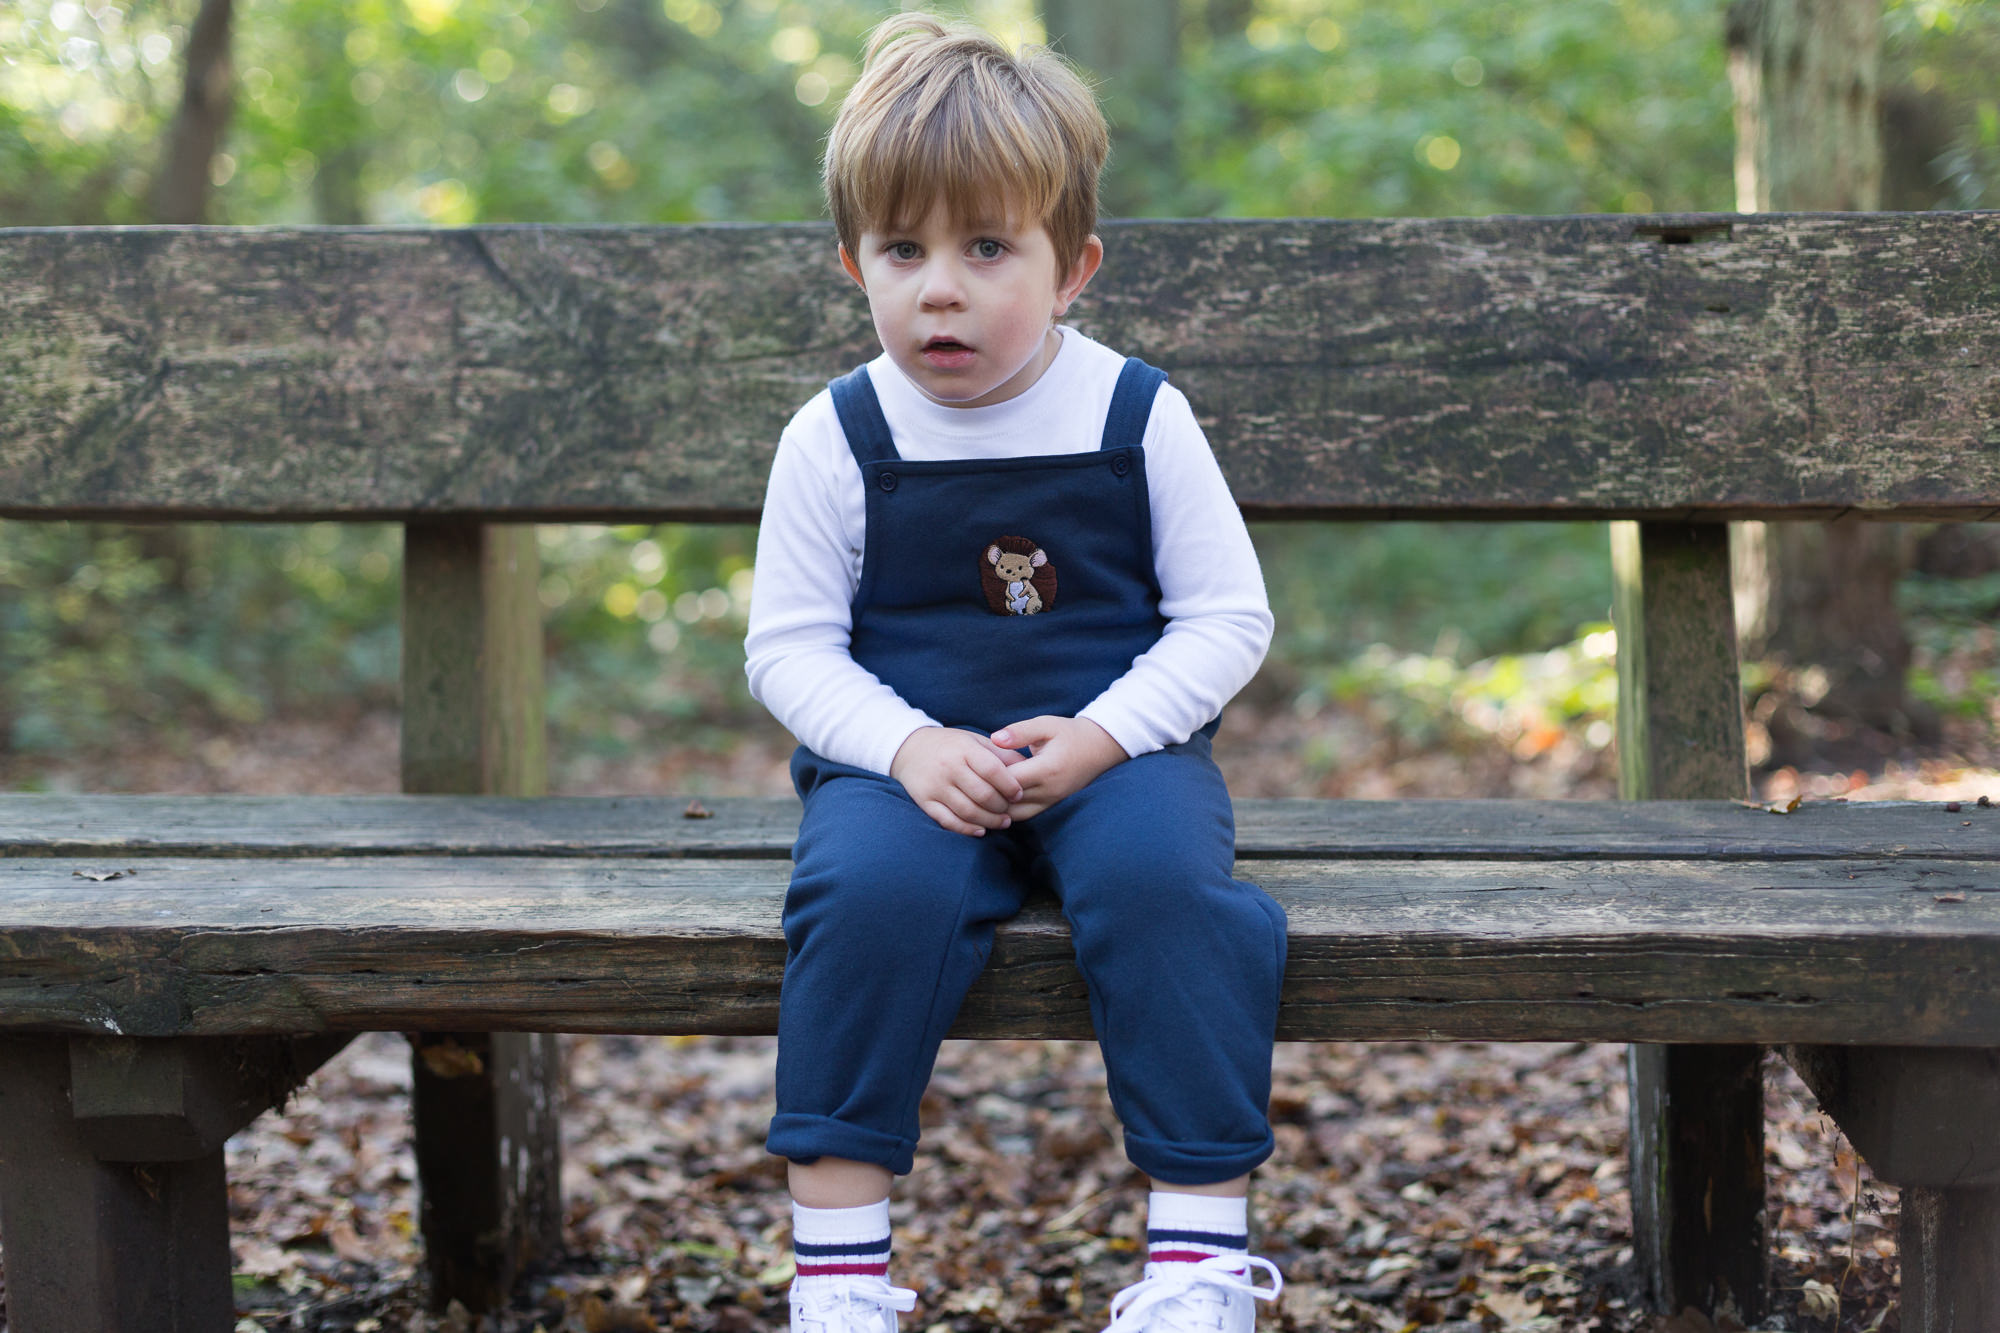 clothing brand model shoot by Nina Callow Commercial and Family photographer Bexley, London 